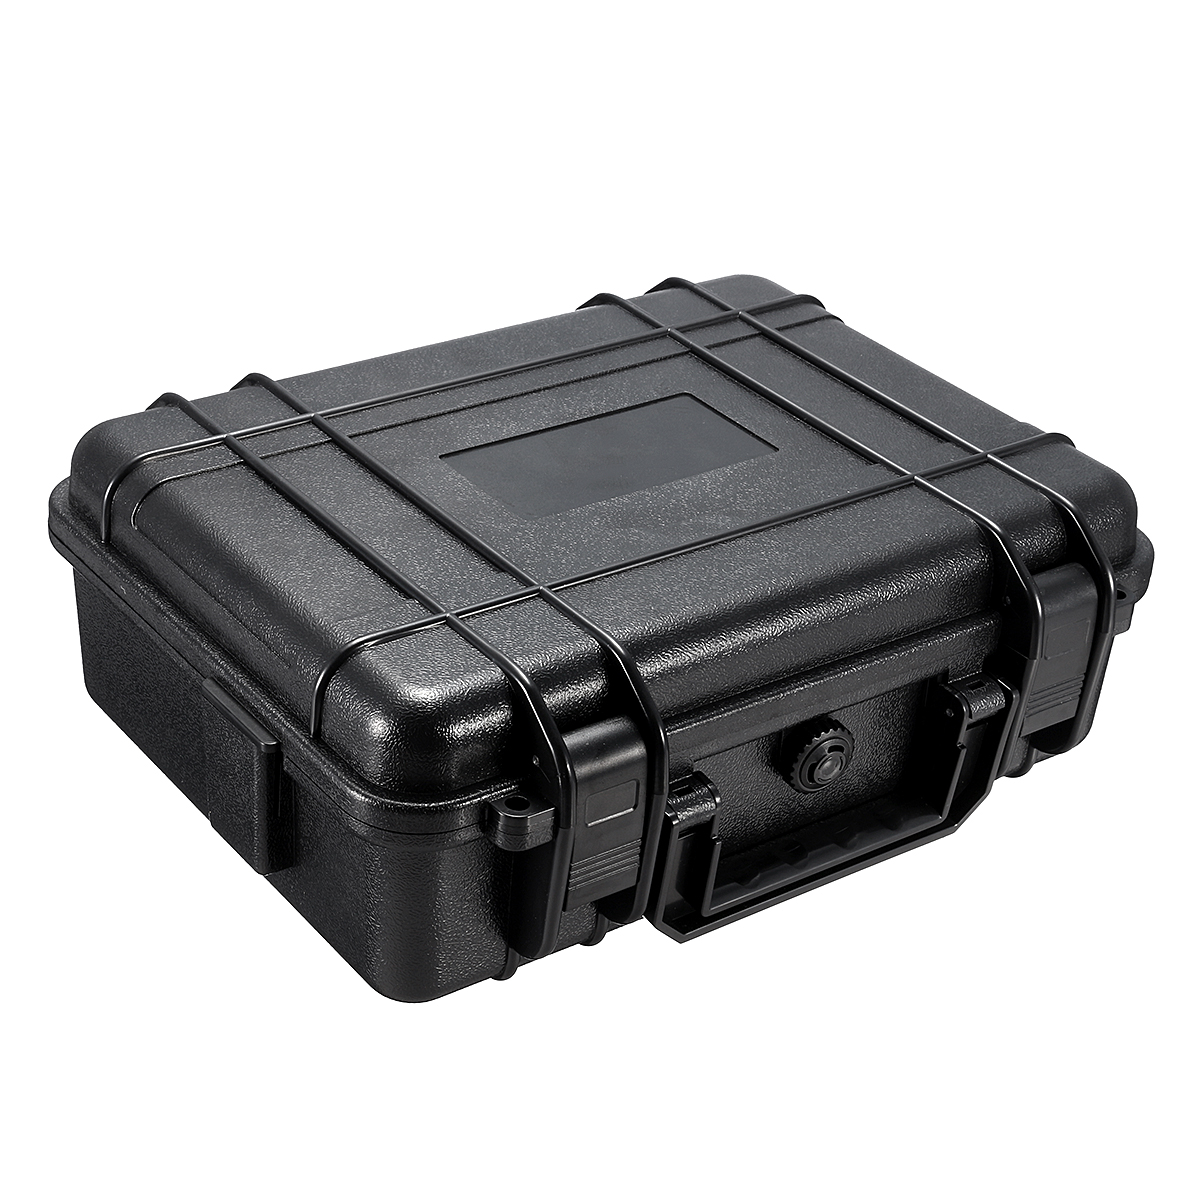 Waterproof-Hard-Carry-Tool-Case-Bag-Storage-Box-Camera-Photography-with-Sponge-18012050mm-1661734-6